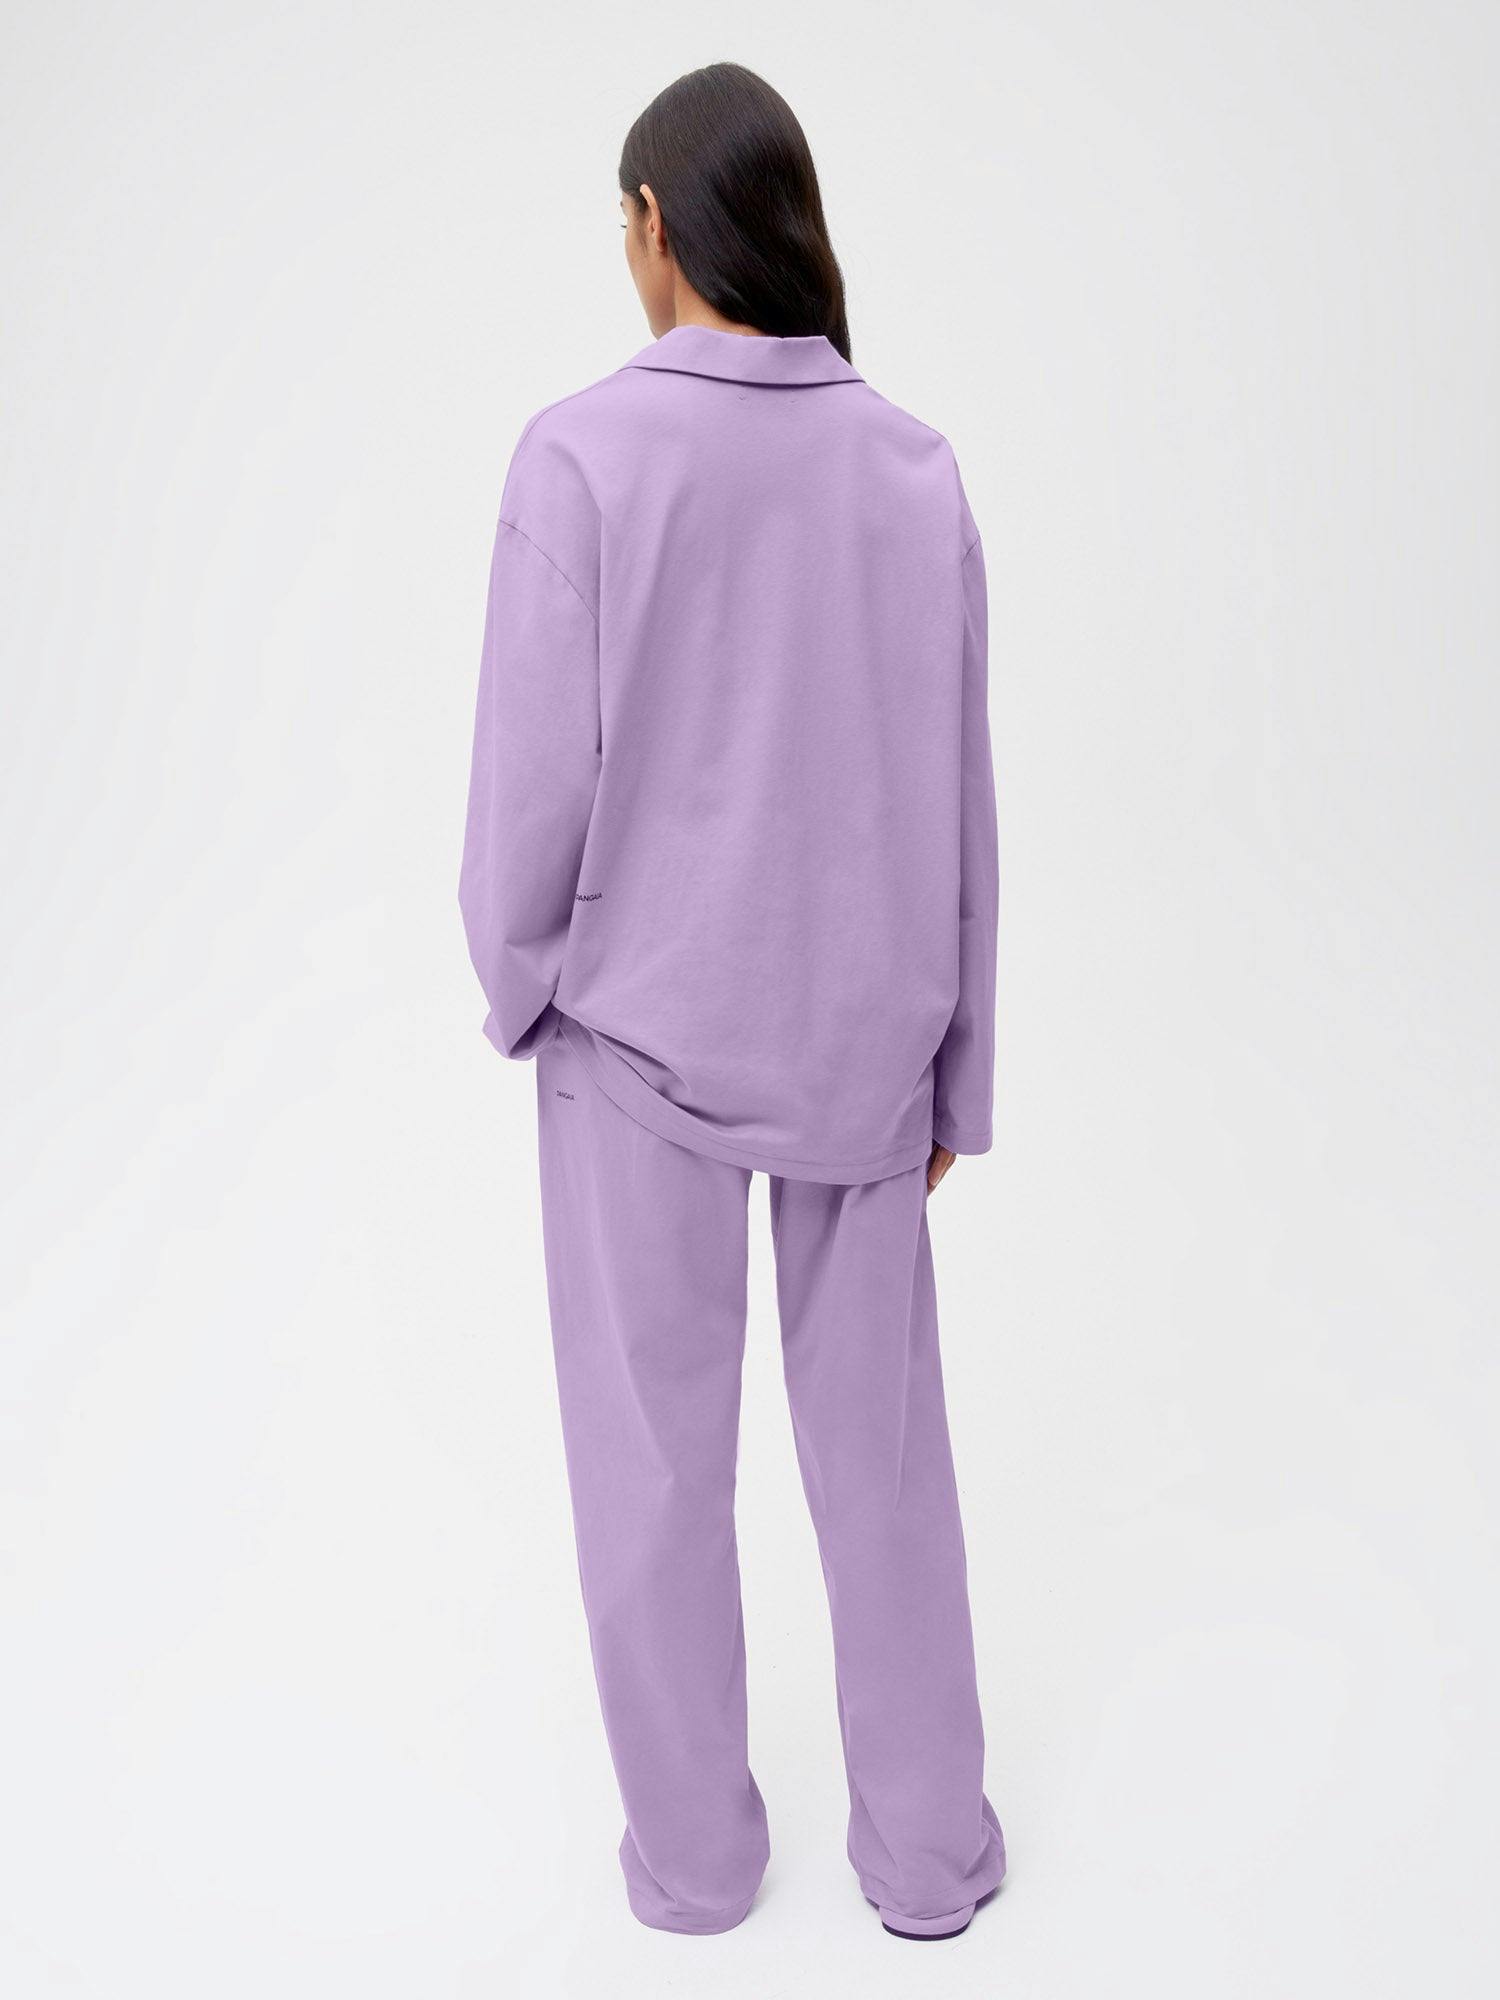 https://cdn.shopify.com/s/files/1/0035/1309/0115/products/Organic-Cotton-Pajama-Loose-Pant-Orchid-Purple-Female-2.jpg?v=1662476129